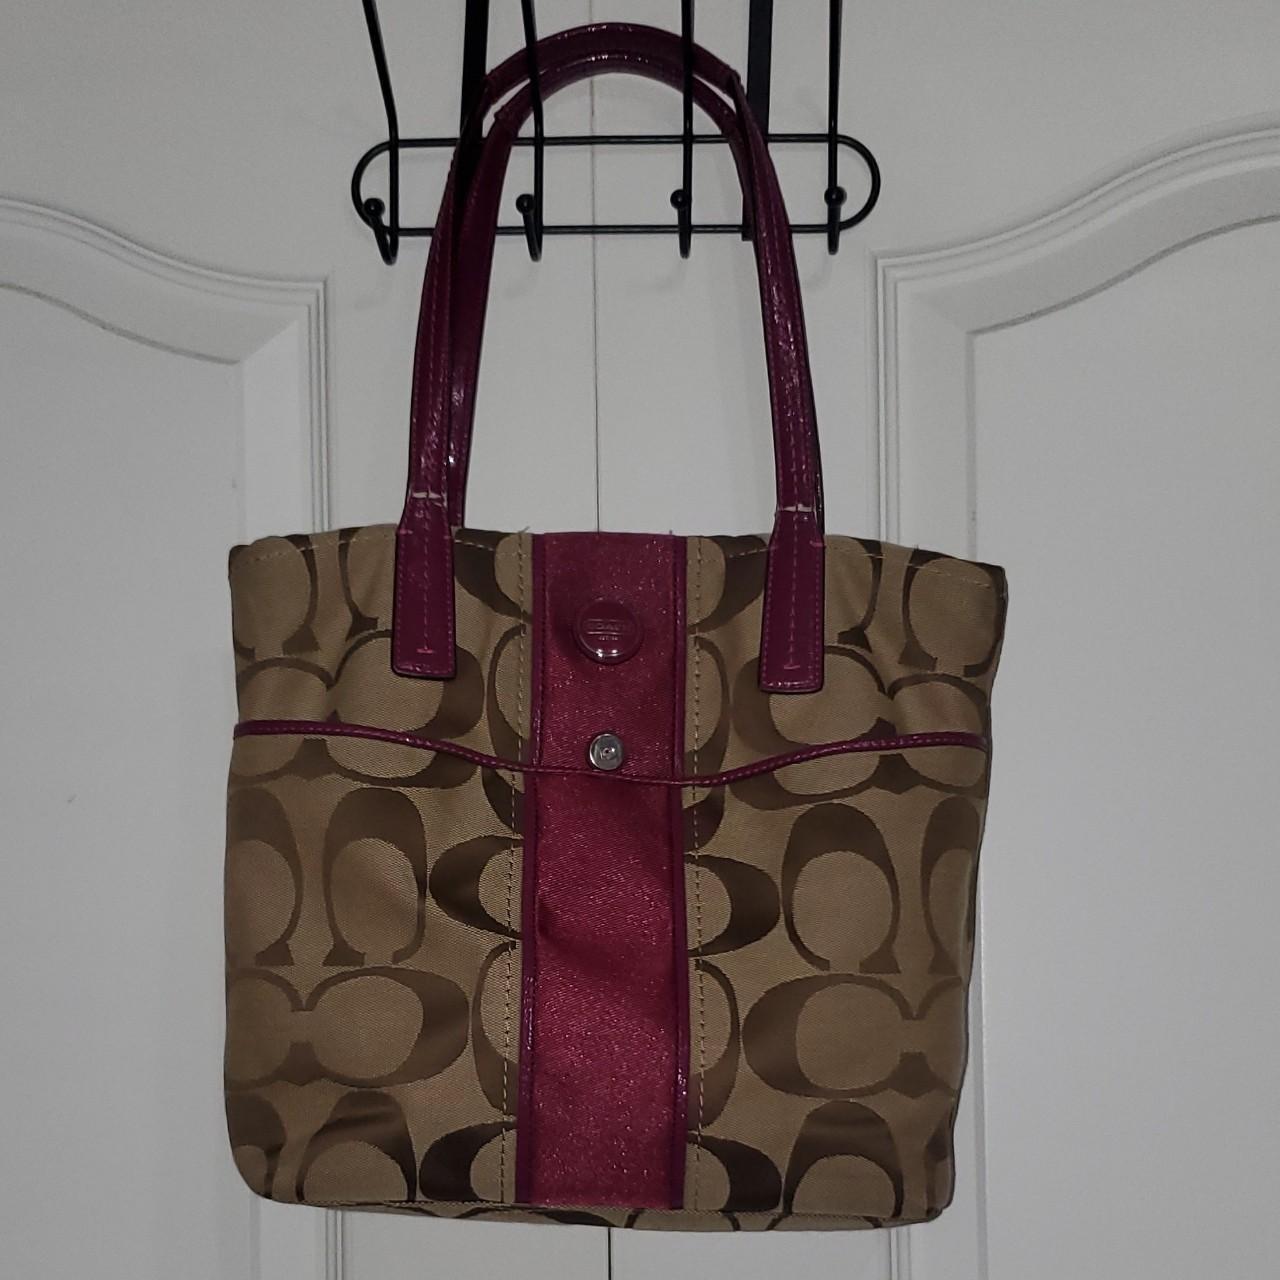 Coach - Authenticated Handbag - Cloth Brown for Women, Good Condition